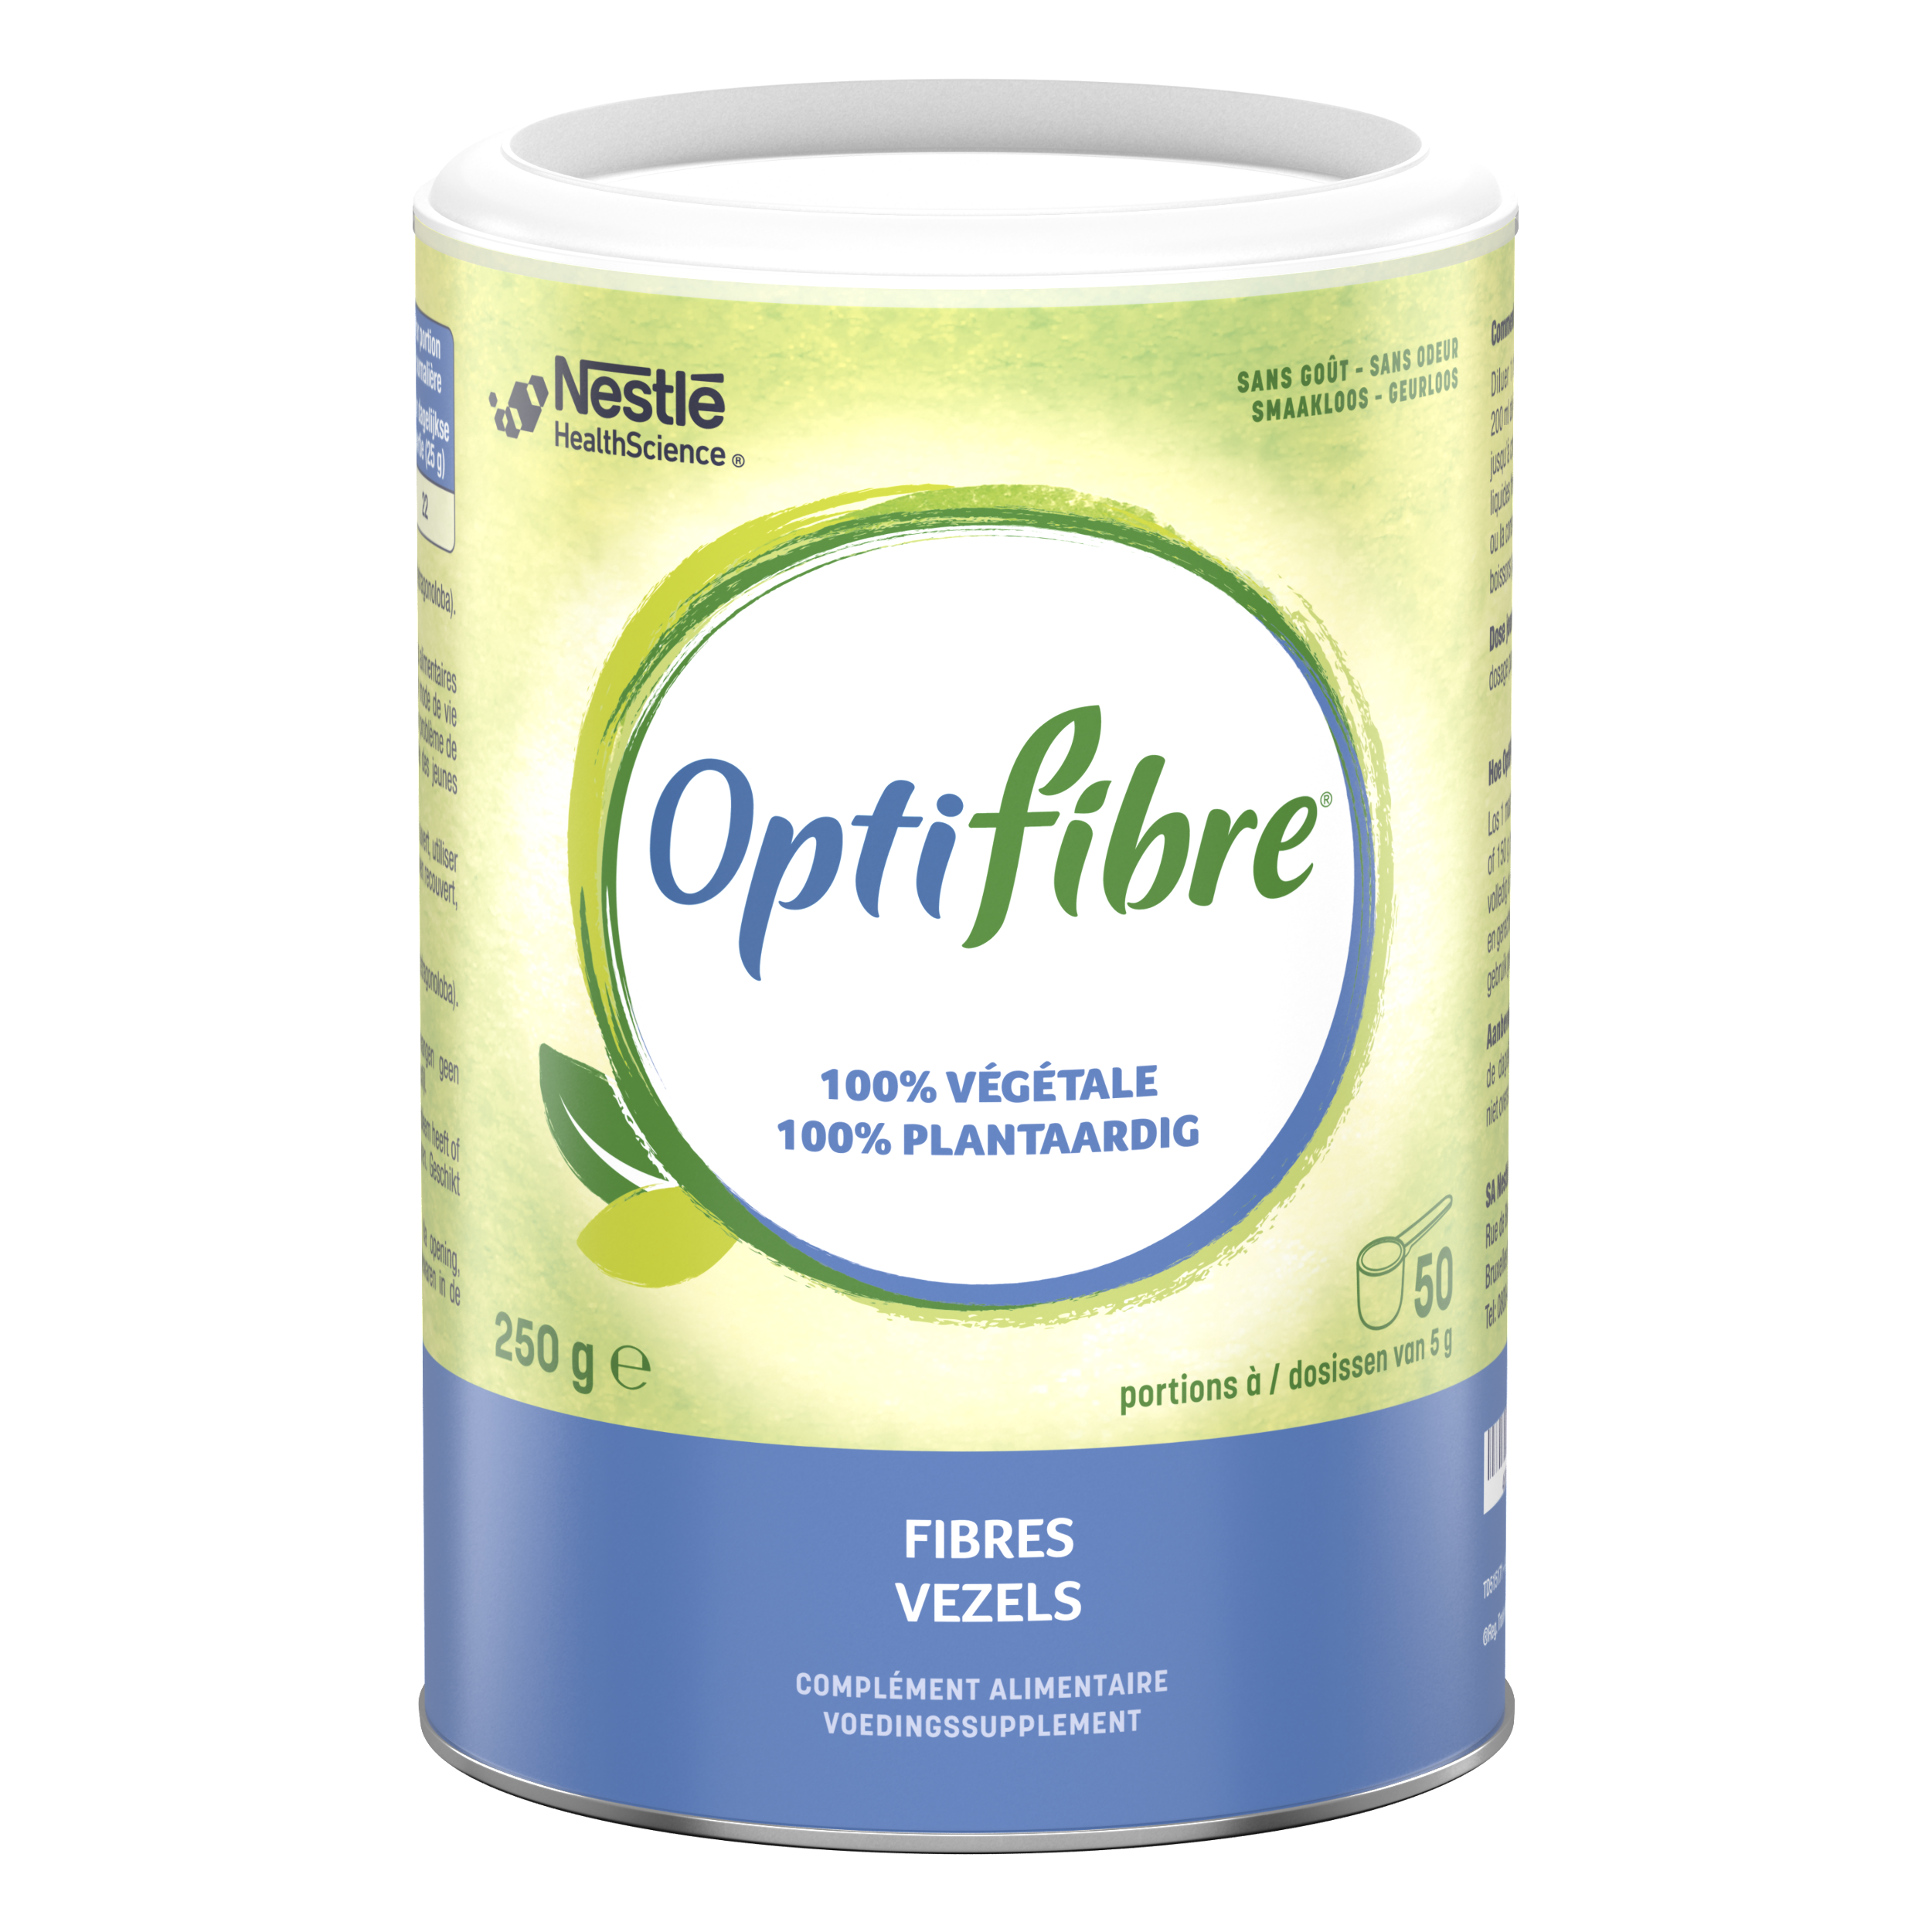 OptiFibre - Nestlé Fibres Solubles 250g 50doses - Health In Your Home